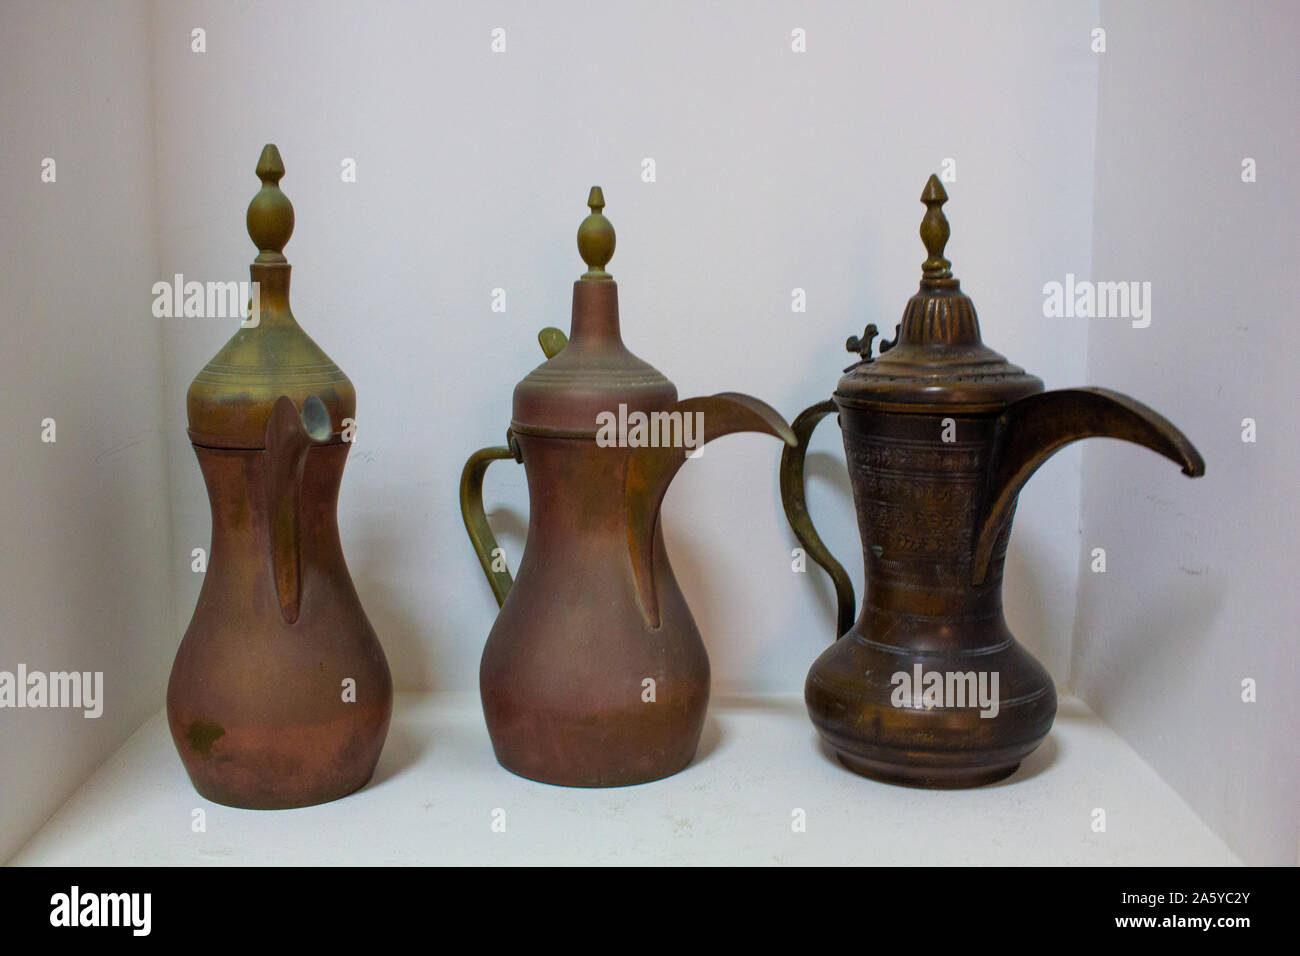 Arab traditional old antique items. Brass coffee pot,cups,plates and trays. Stock Photo